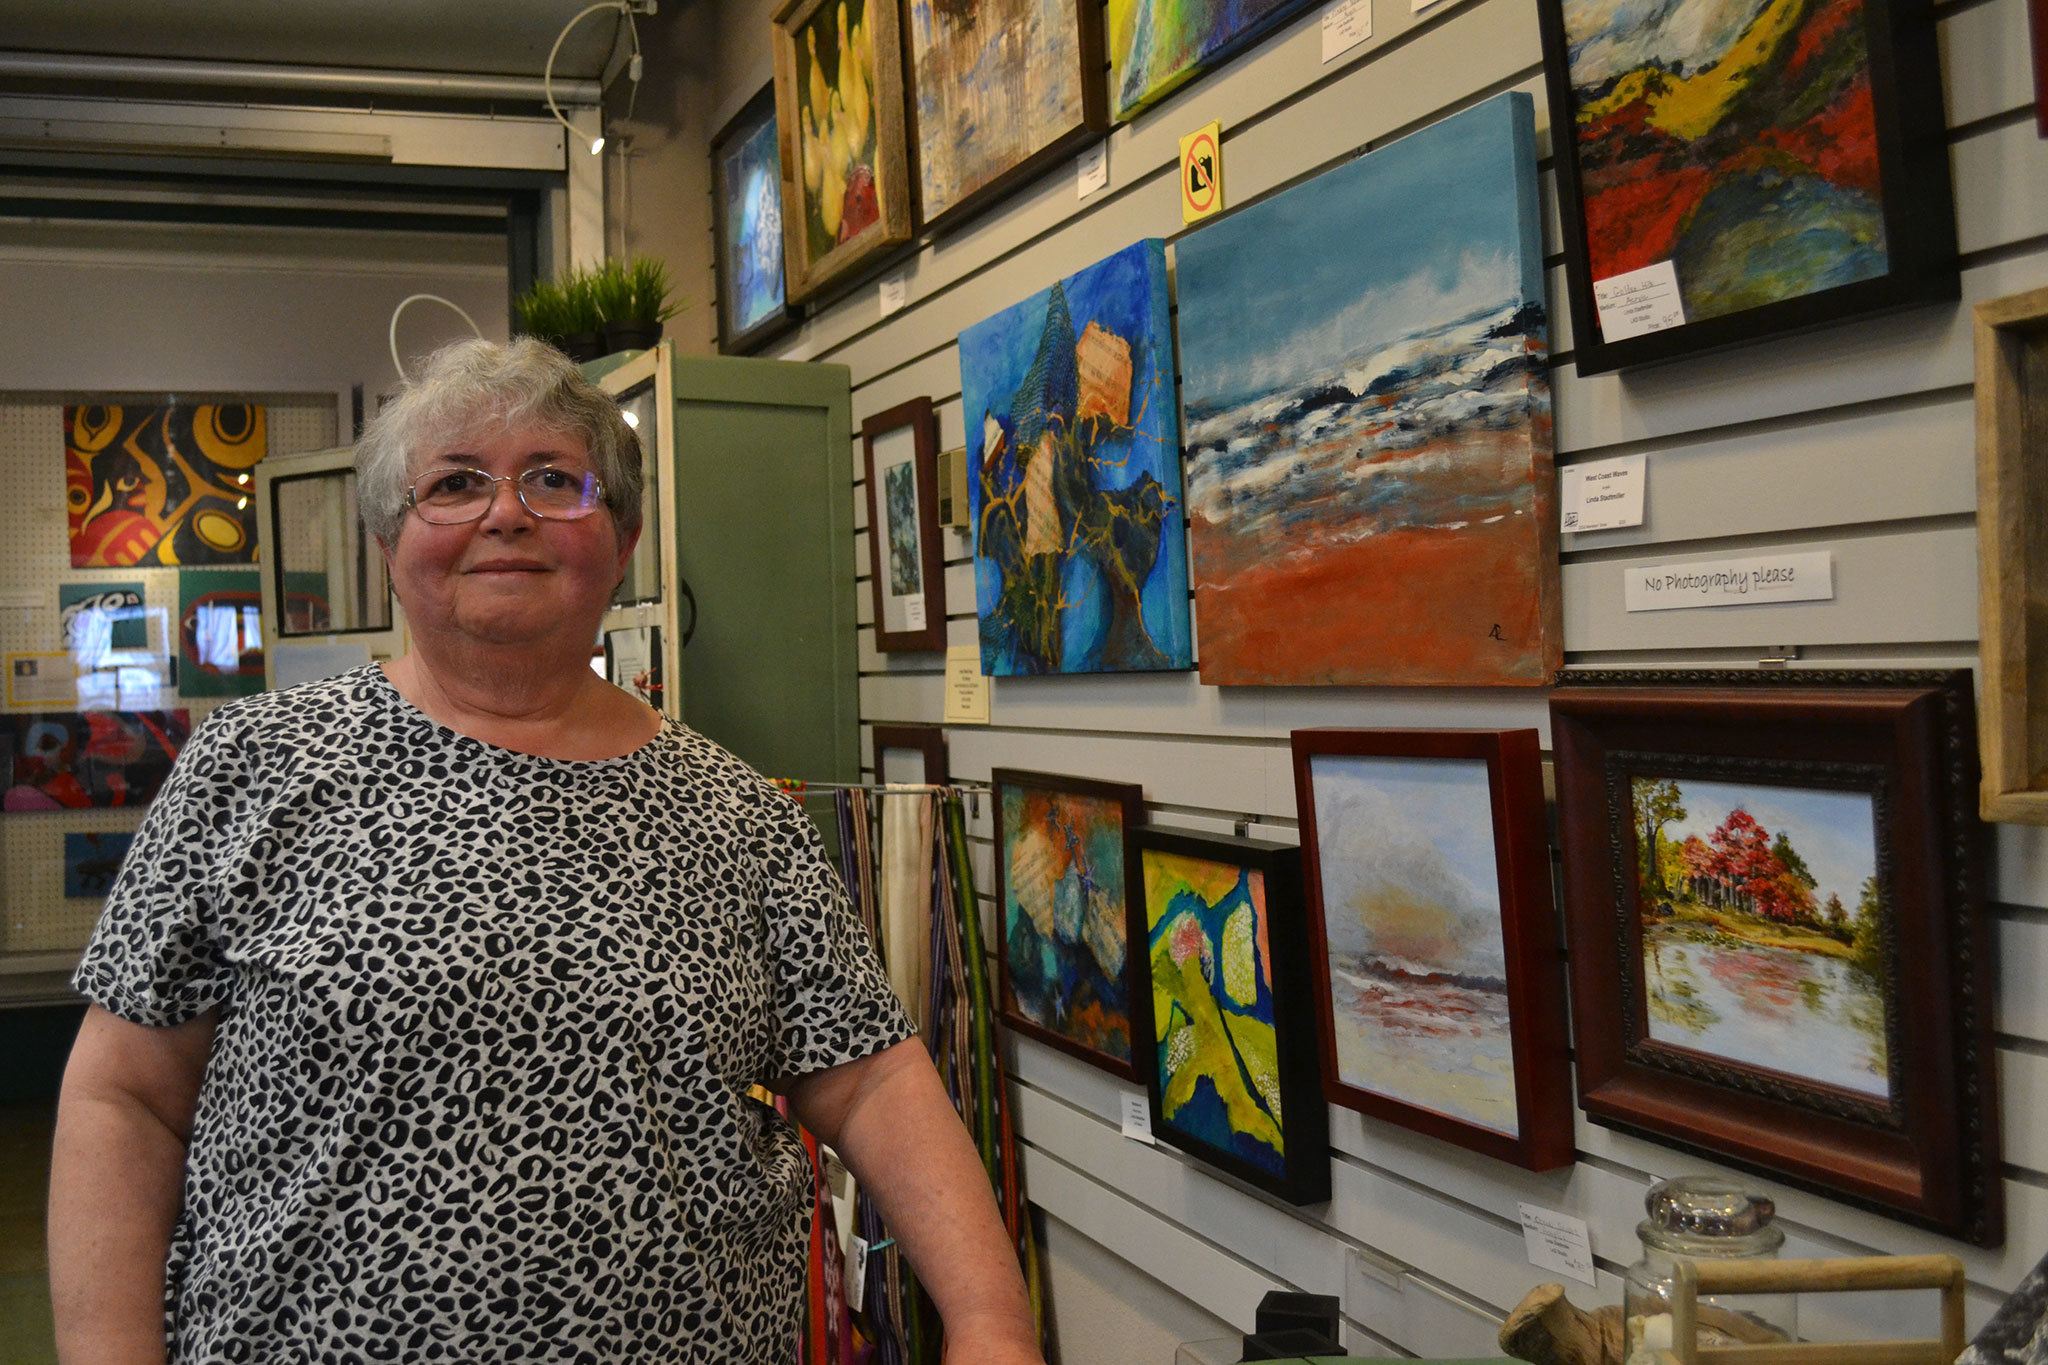 Since May 2015, Linda Stadtmiller has created at least two dozen pieces of art following a stroke. One of two things she says to encourage people with similar circumstances is “you’re disabled, not dead. There’s a lot of things you can do. You can adapt.” Sequim Gazette photo by Matthew Nash